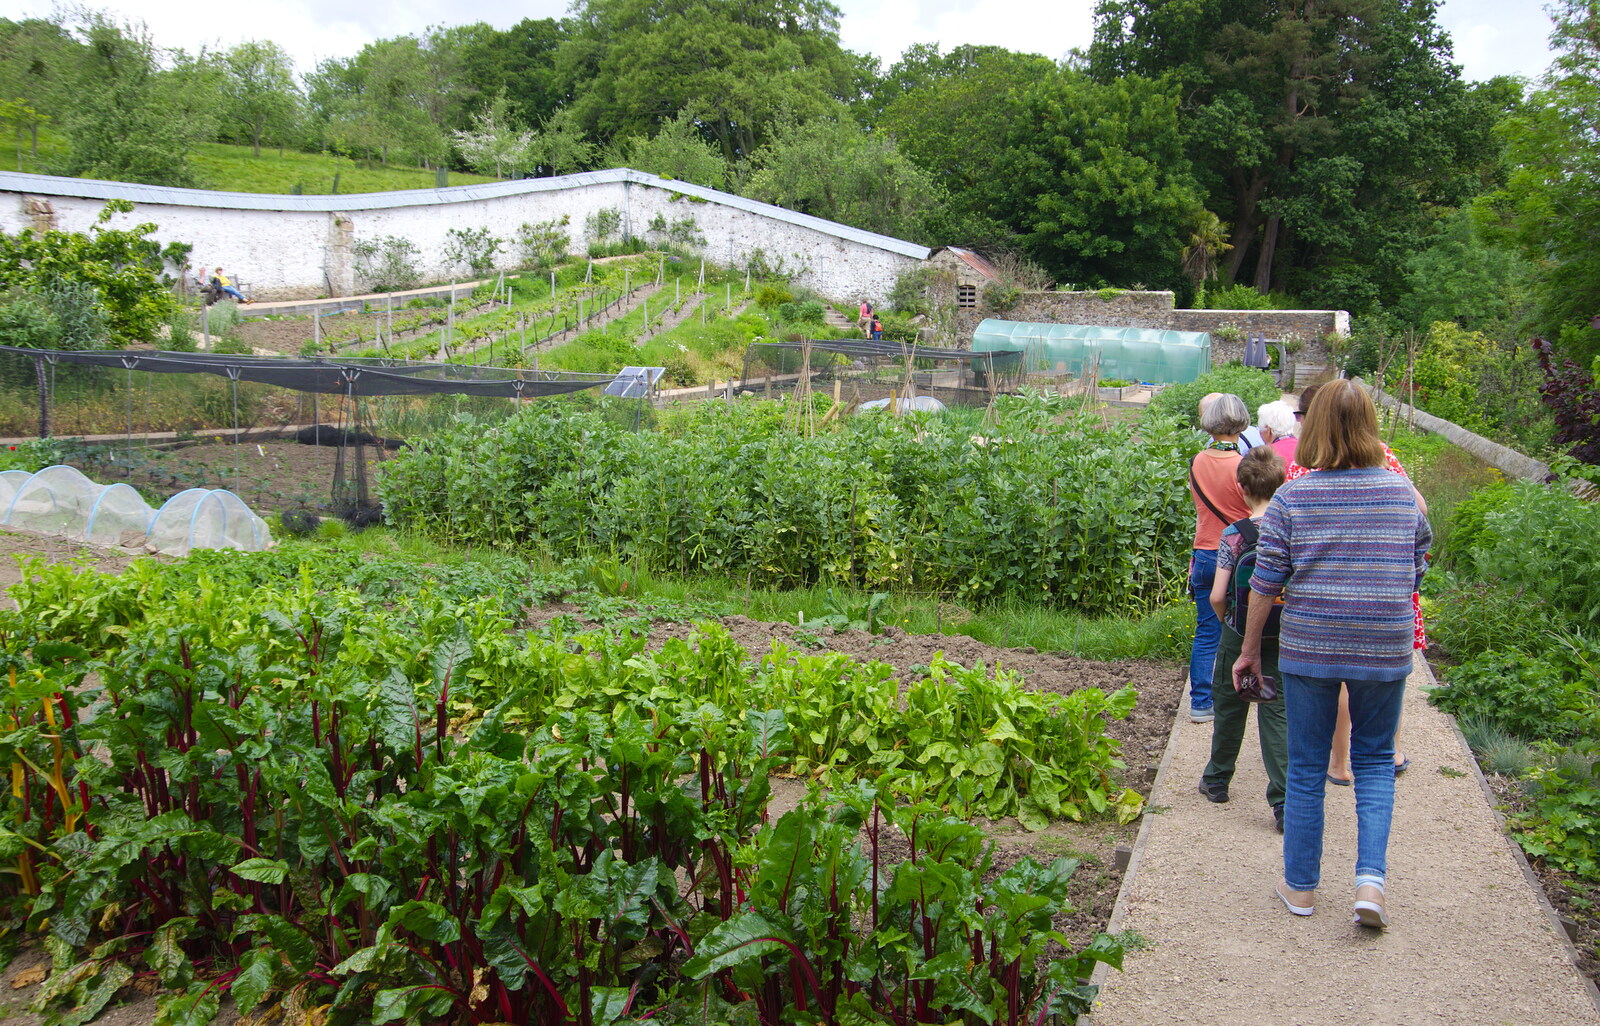 Grandma J in the walled garden from Chagford Lido and a Trip to Parke, Bovey Tracey, Devon - 25th May 2019